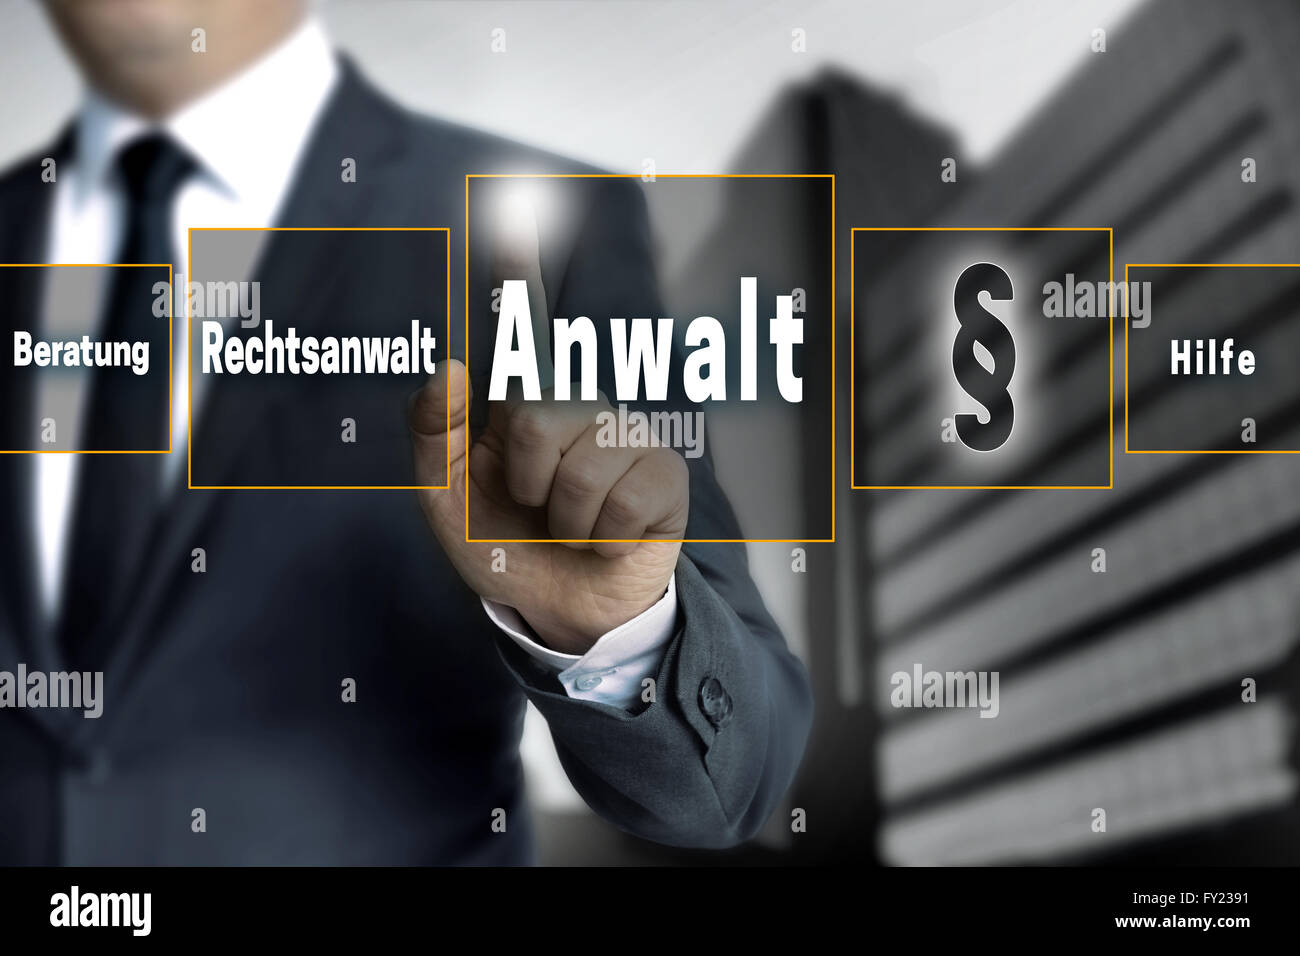 anwalt (in german lawyer, attorney, help, advice) touchscreen is operated by businessman. Stock Photo